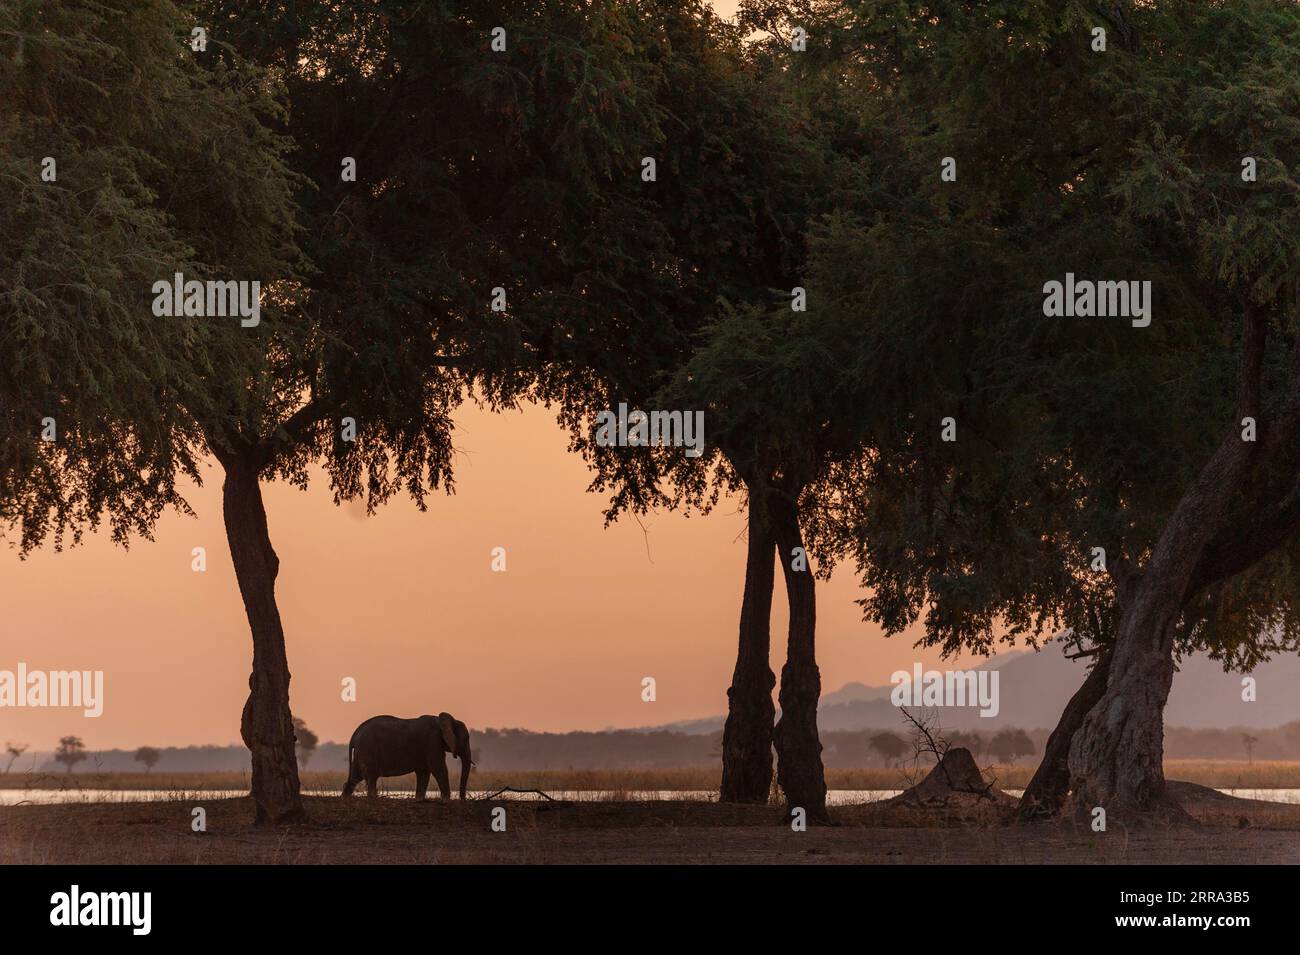 African elephant, Loxodonta africana are seen in a golden sunset with Faidherbia albida trees in Zimbabwe's Mana Pools National Park. Stock Photo